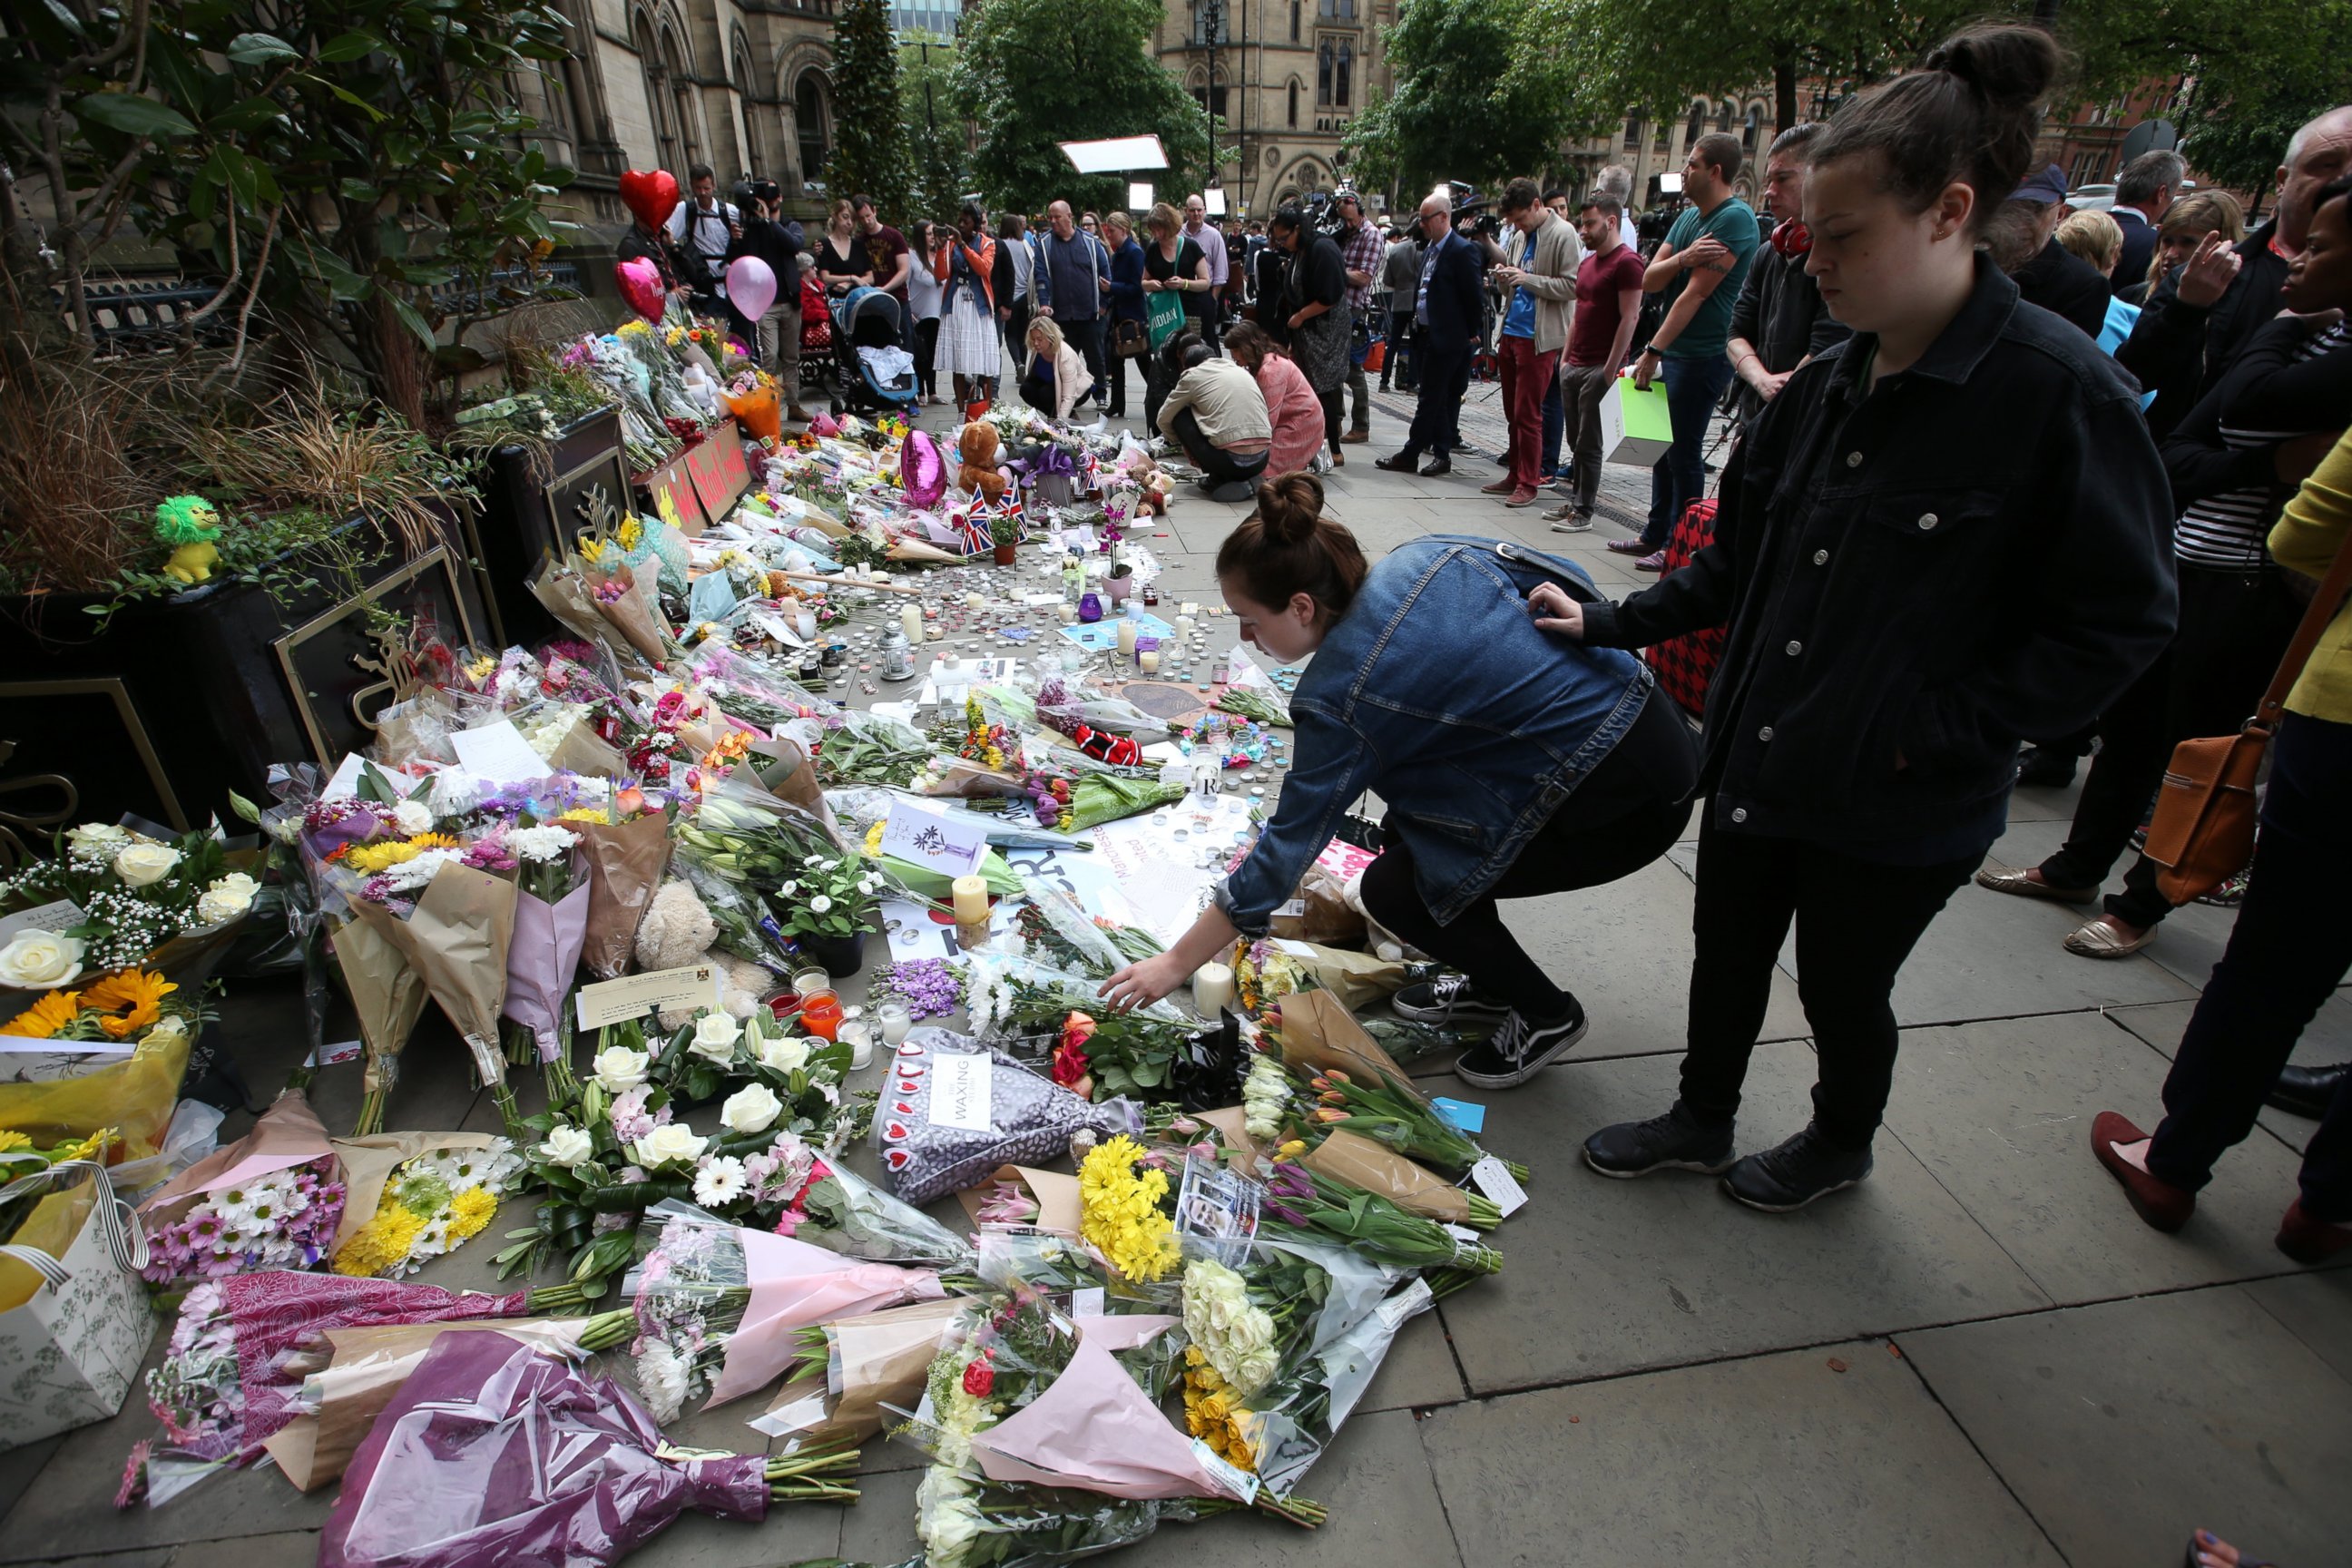 PHOTO: People at Albert Square in Manchester, UK look at the growing amount of floral tributes for the victims of the Manchester terror attack.